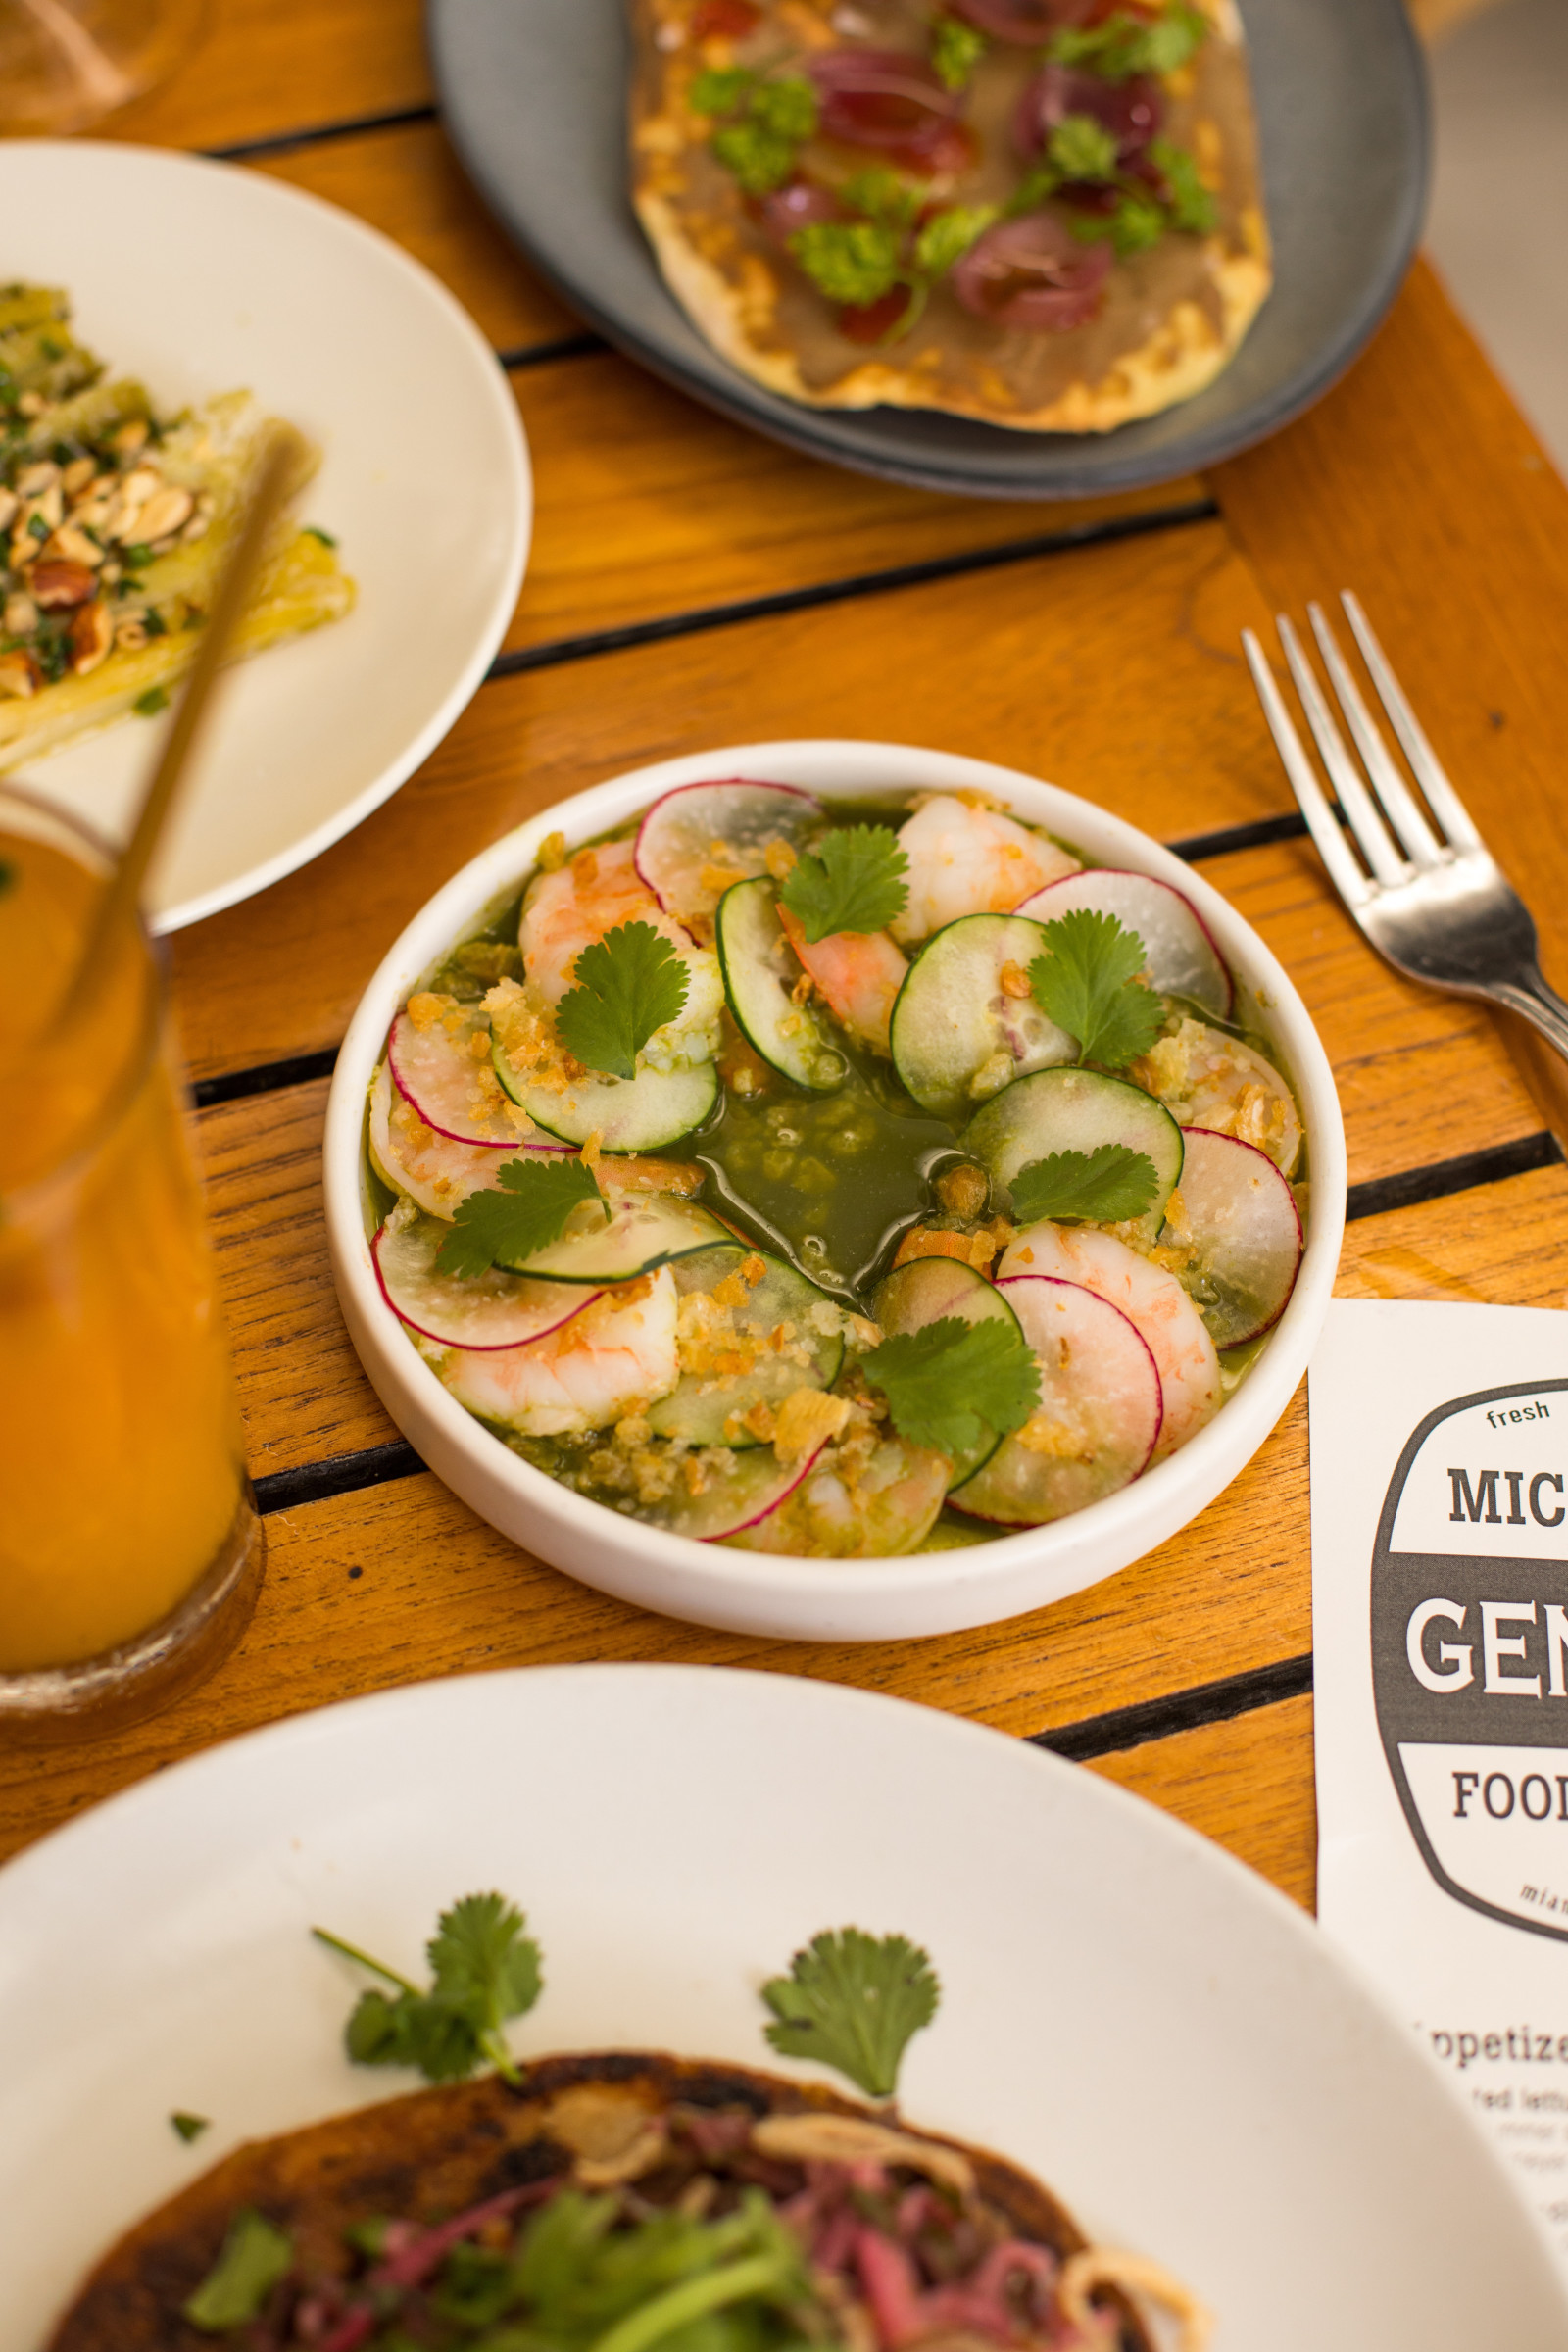 Michael's Genuine Food & Drink Brand New Look and Renovations - Eater Miami